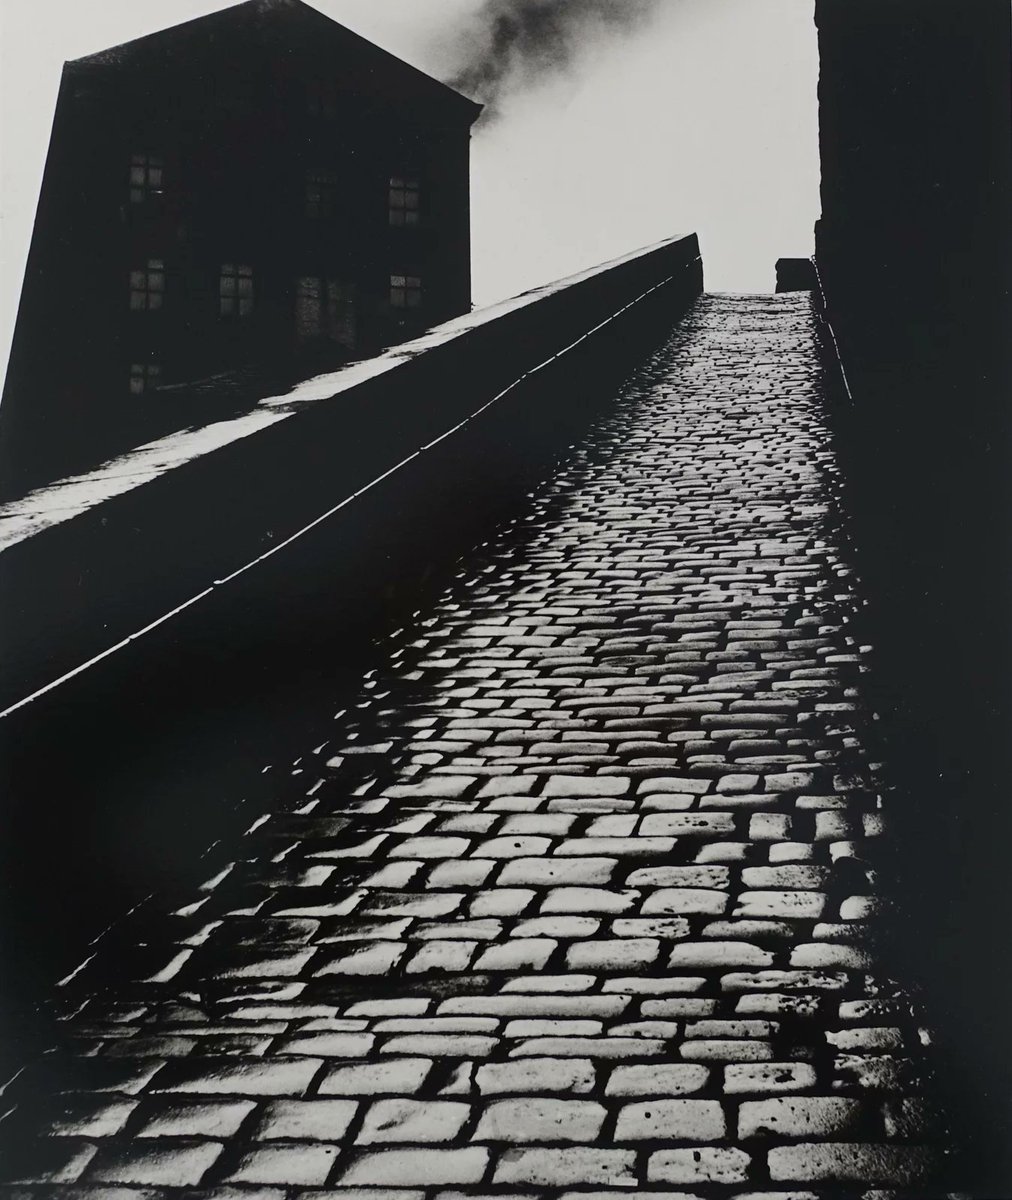 On the left is a proper snicket. On the right is a railway bridge in Halifax (by Bill Brandt) not a snicket